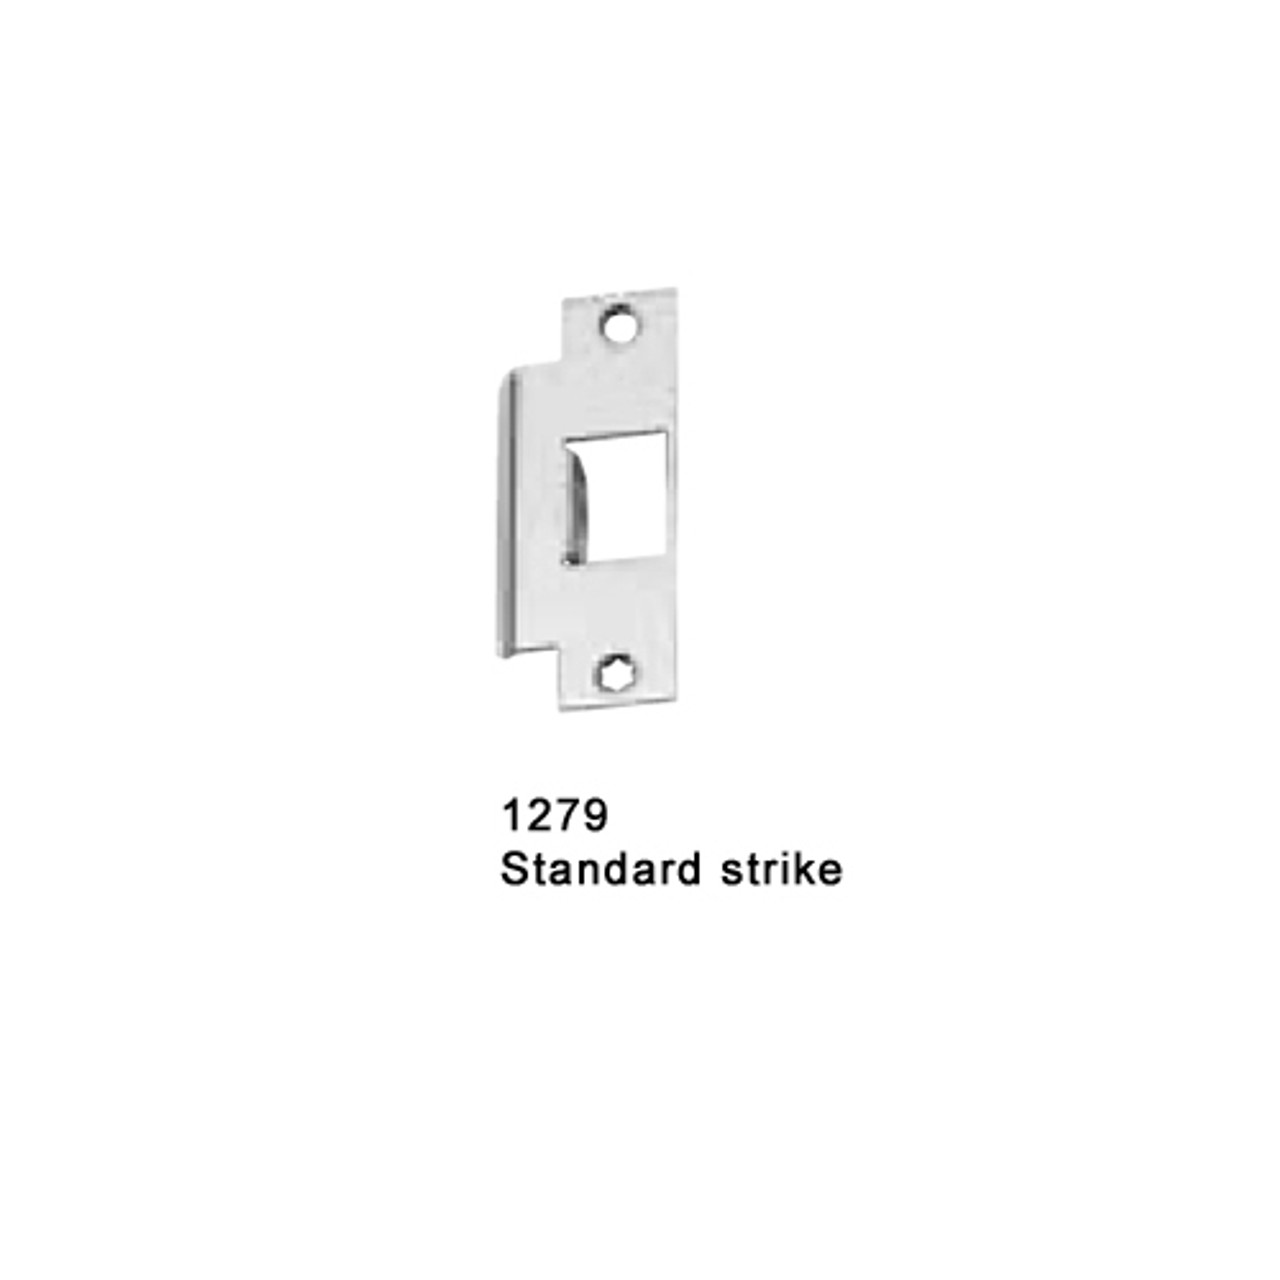 F-25-M-L-BE-Dane-US26-4-RHR Falcon 25 Series Fire Rated Mortise Lock Devices 510L-BE Dane Lever Trim with Blank Escutcheon in Polished Chrome